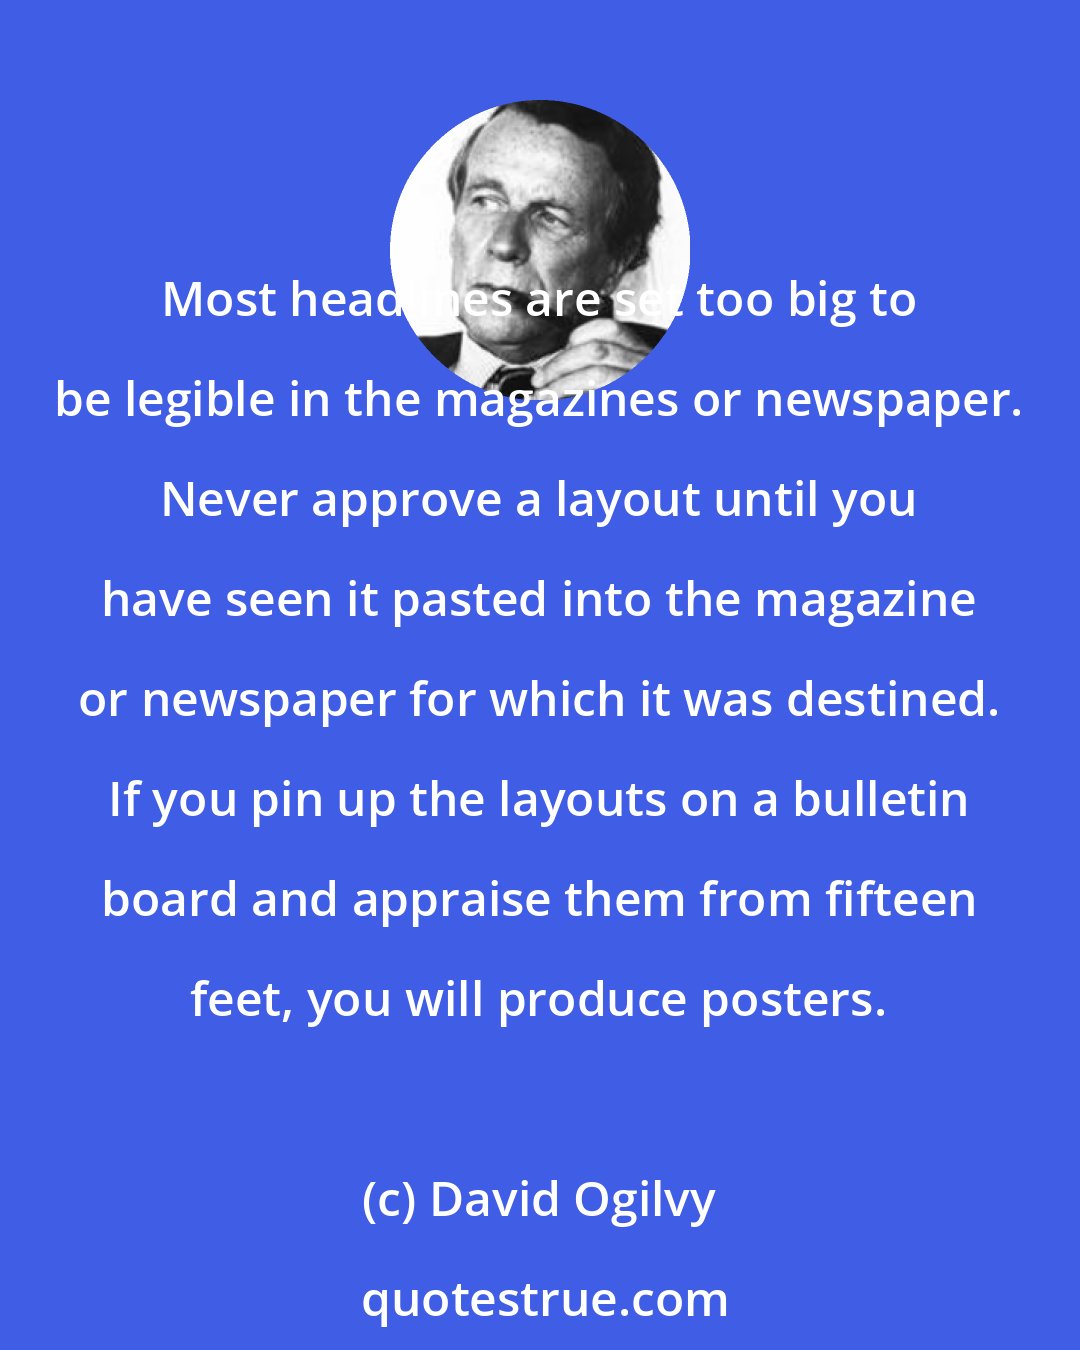 David Ogilvy: Most headlines are set too big to be legible in the magazines or newspaper. Never approve a layout until you have seen it pasted into the magazine or newspaper for which it was destined. If you pin up the layouts on a bulletin board and appraise them from fifteen feet, you will produce posters.